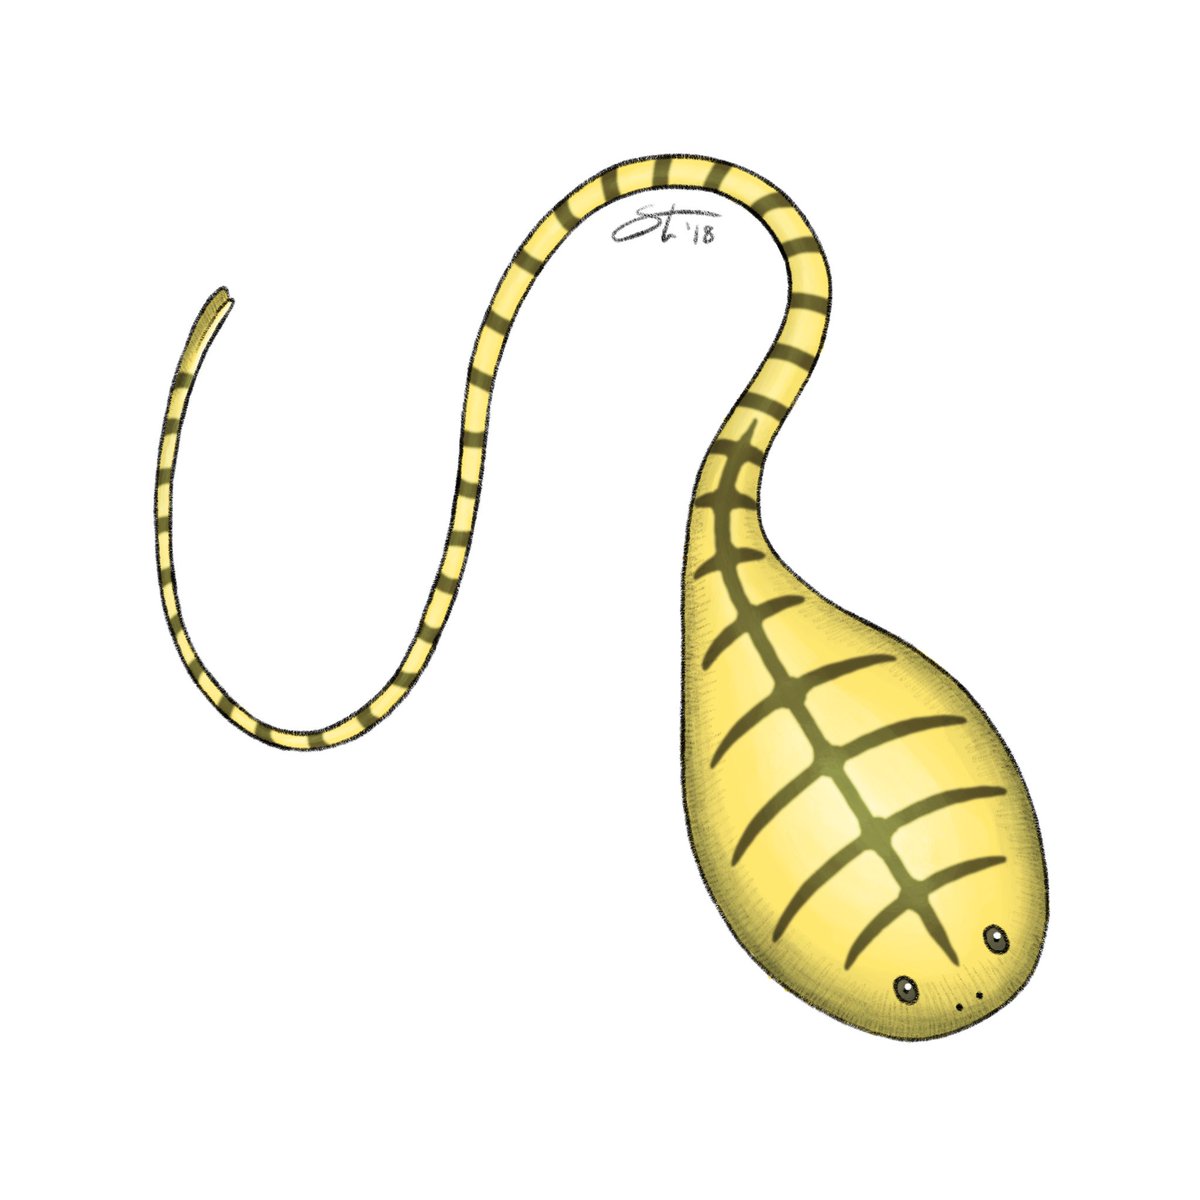 Second only to the Many-Finned in its weirdness, the last of Heuvelmans’ sea-serpents is the Yellow-Belly, a tadpole-shaped animal of indeterminate origin. This is another category that Heuvelmans ultimately discarded, a decision I think we can all agree was wise on his part.